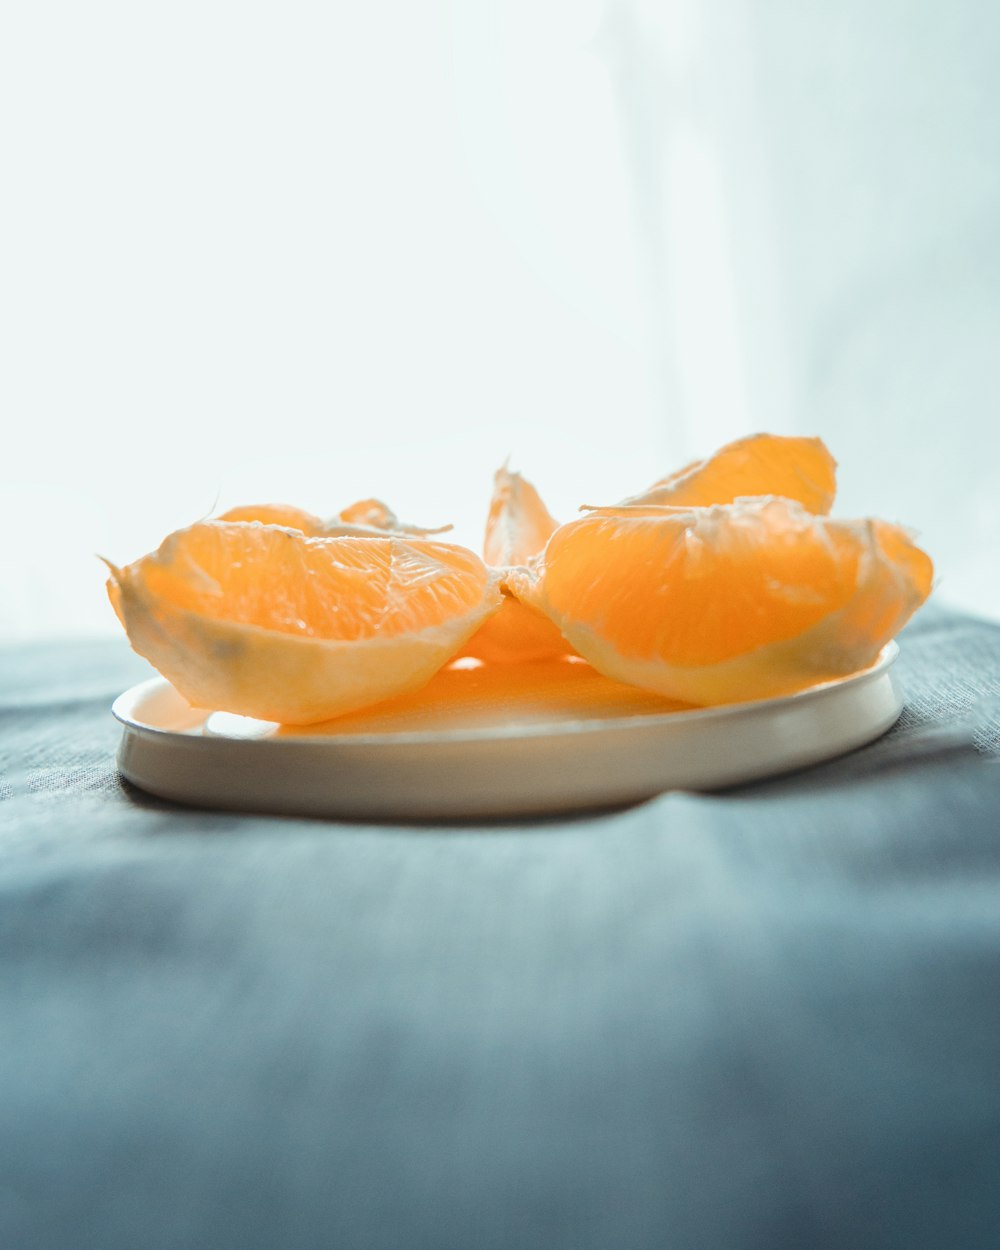 a plate of oranges